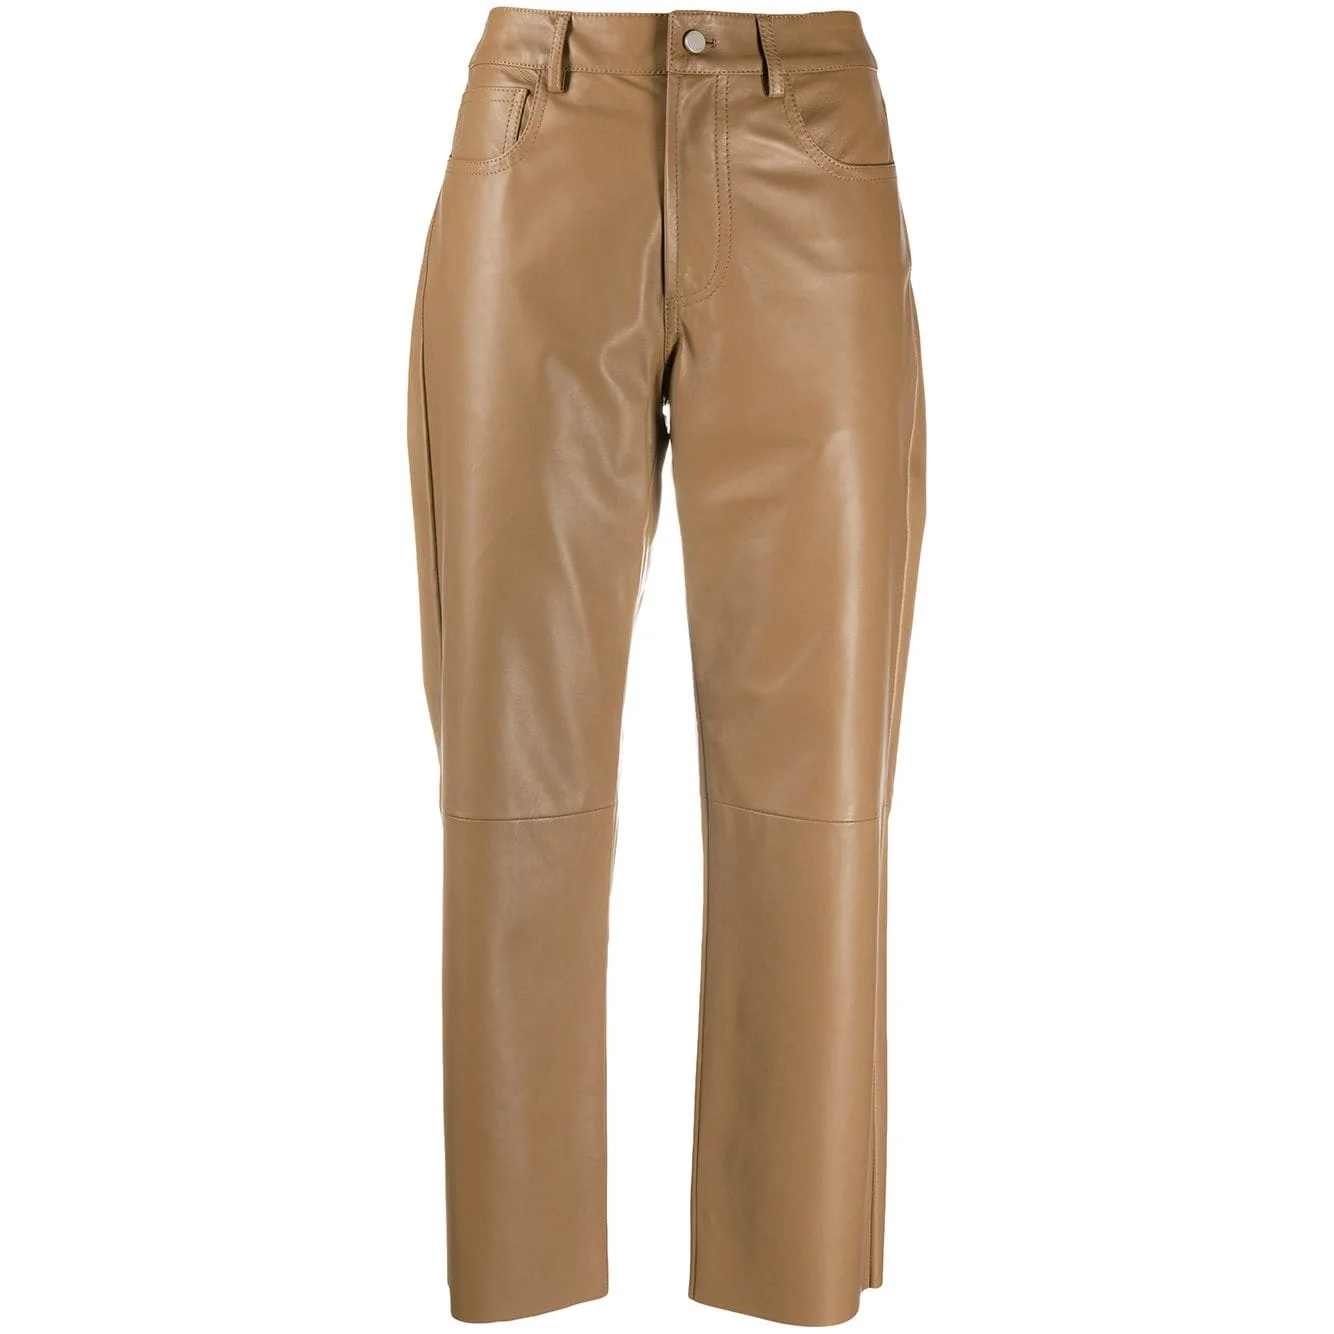 Real Leather Pants Metal Buttons Pure Color Genuine Sheep Leather Pants Female Was Thin Leather Pants With Pockets F2766